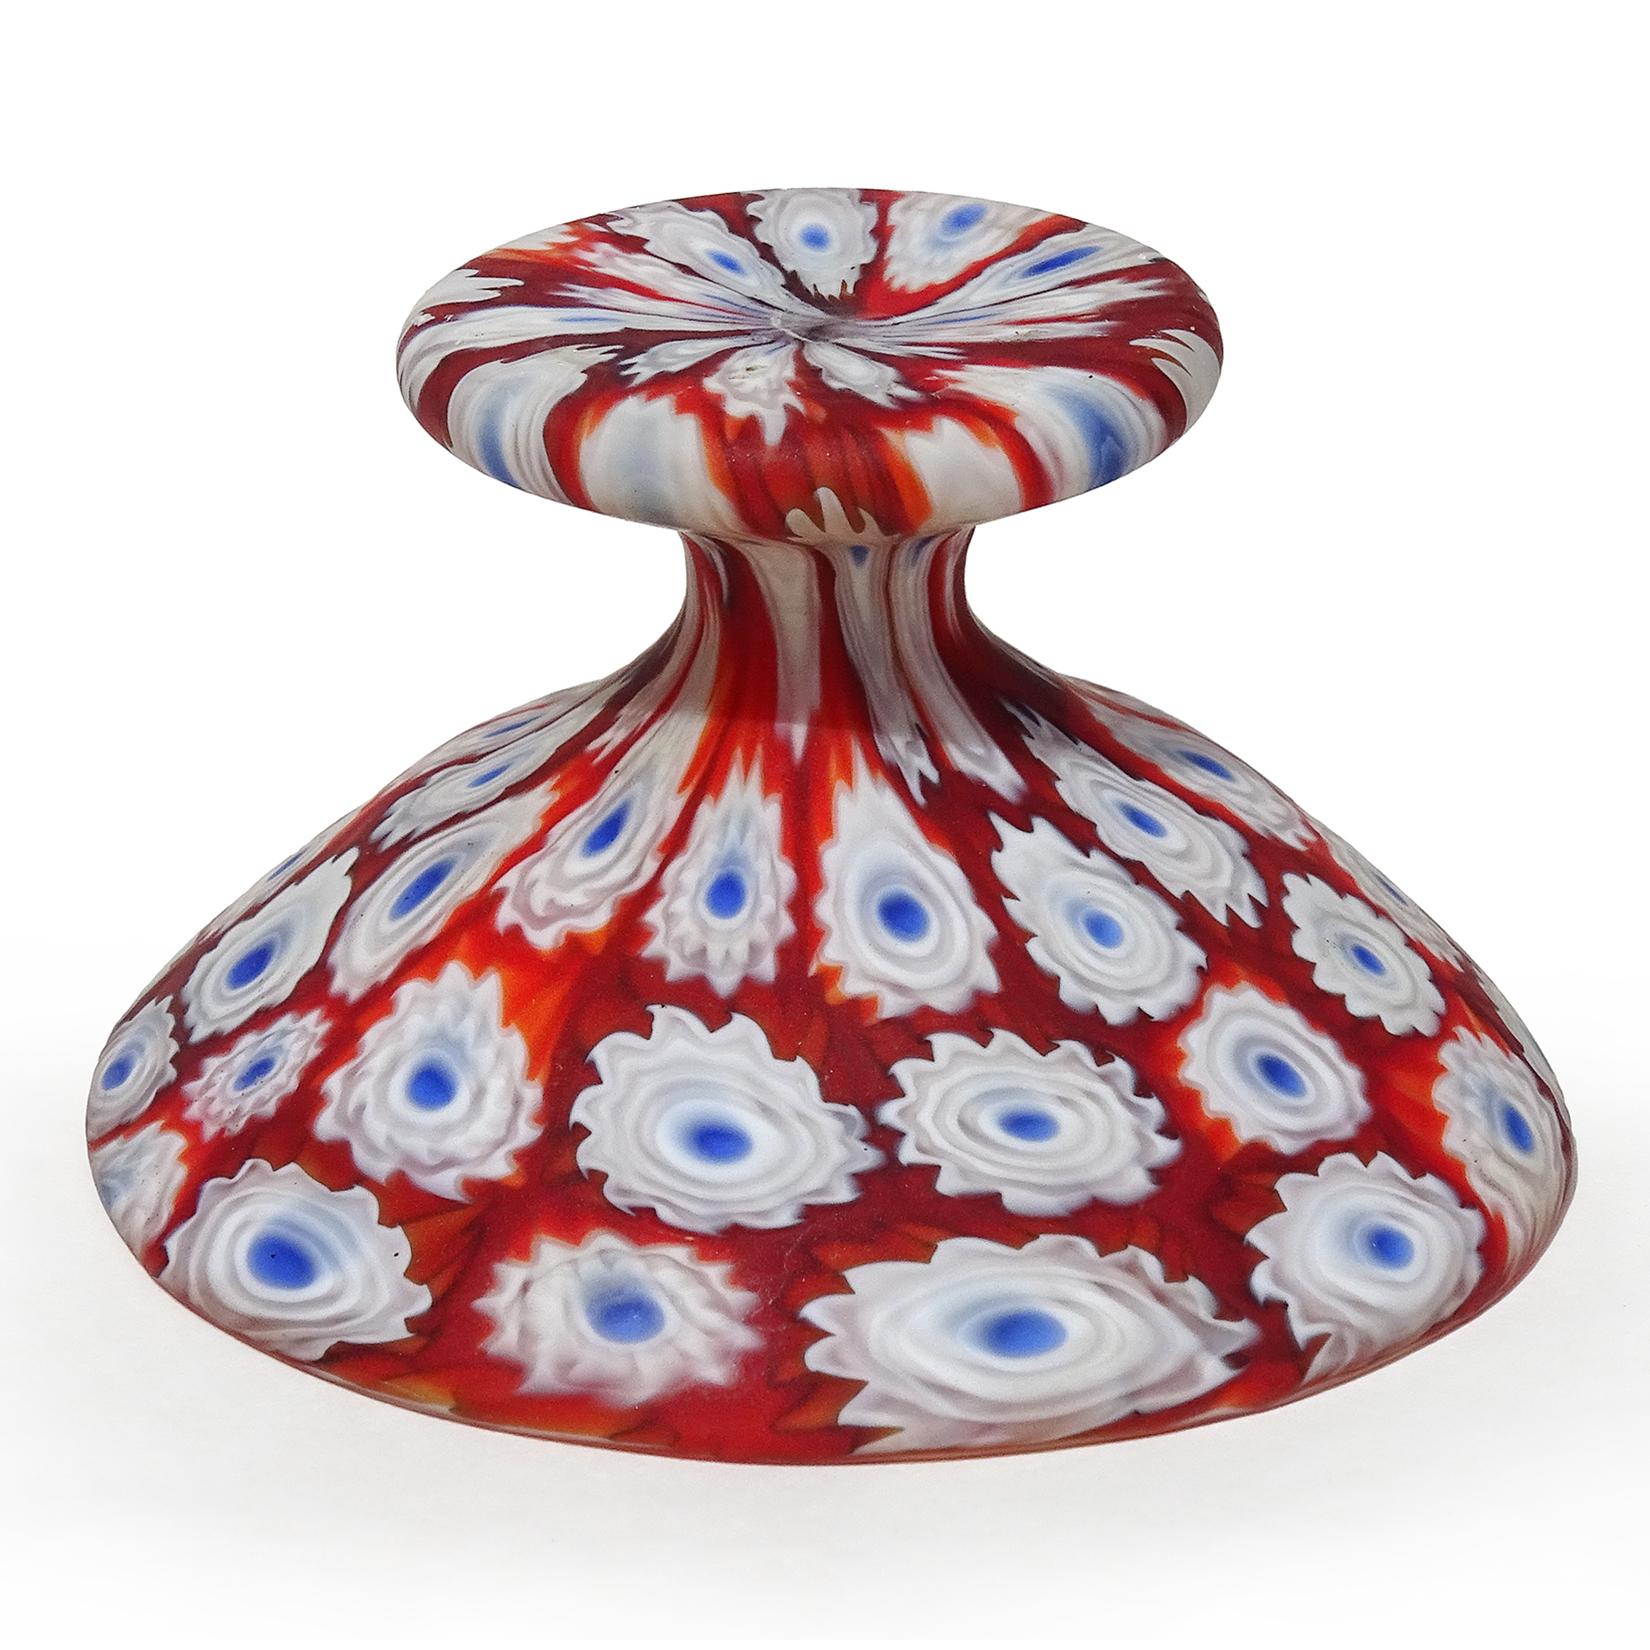 20th Century Fratelli Toso Murano Millefiori Flower Mosaic Italian Art Glass Footed Cup For Sale